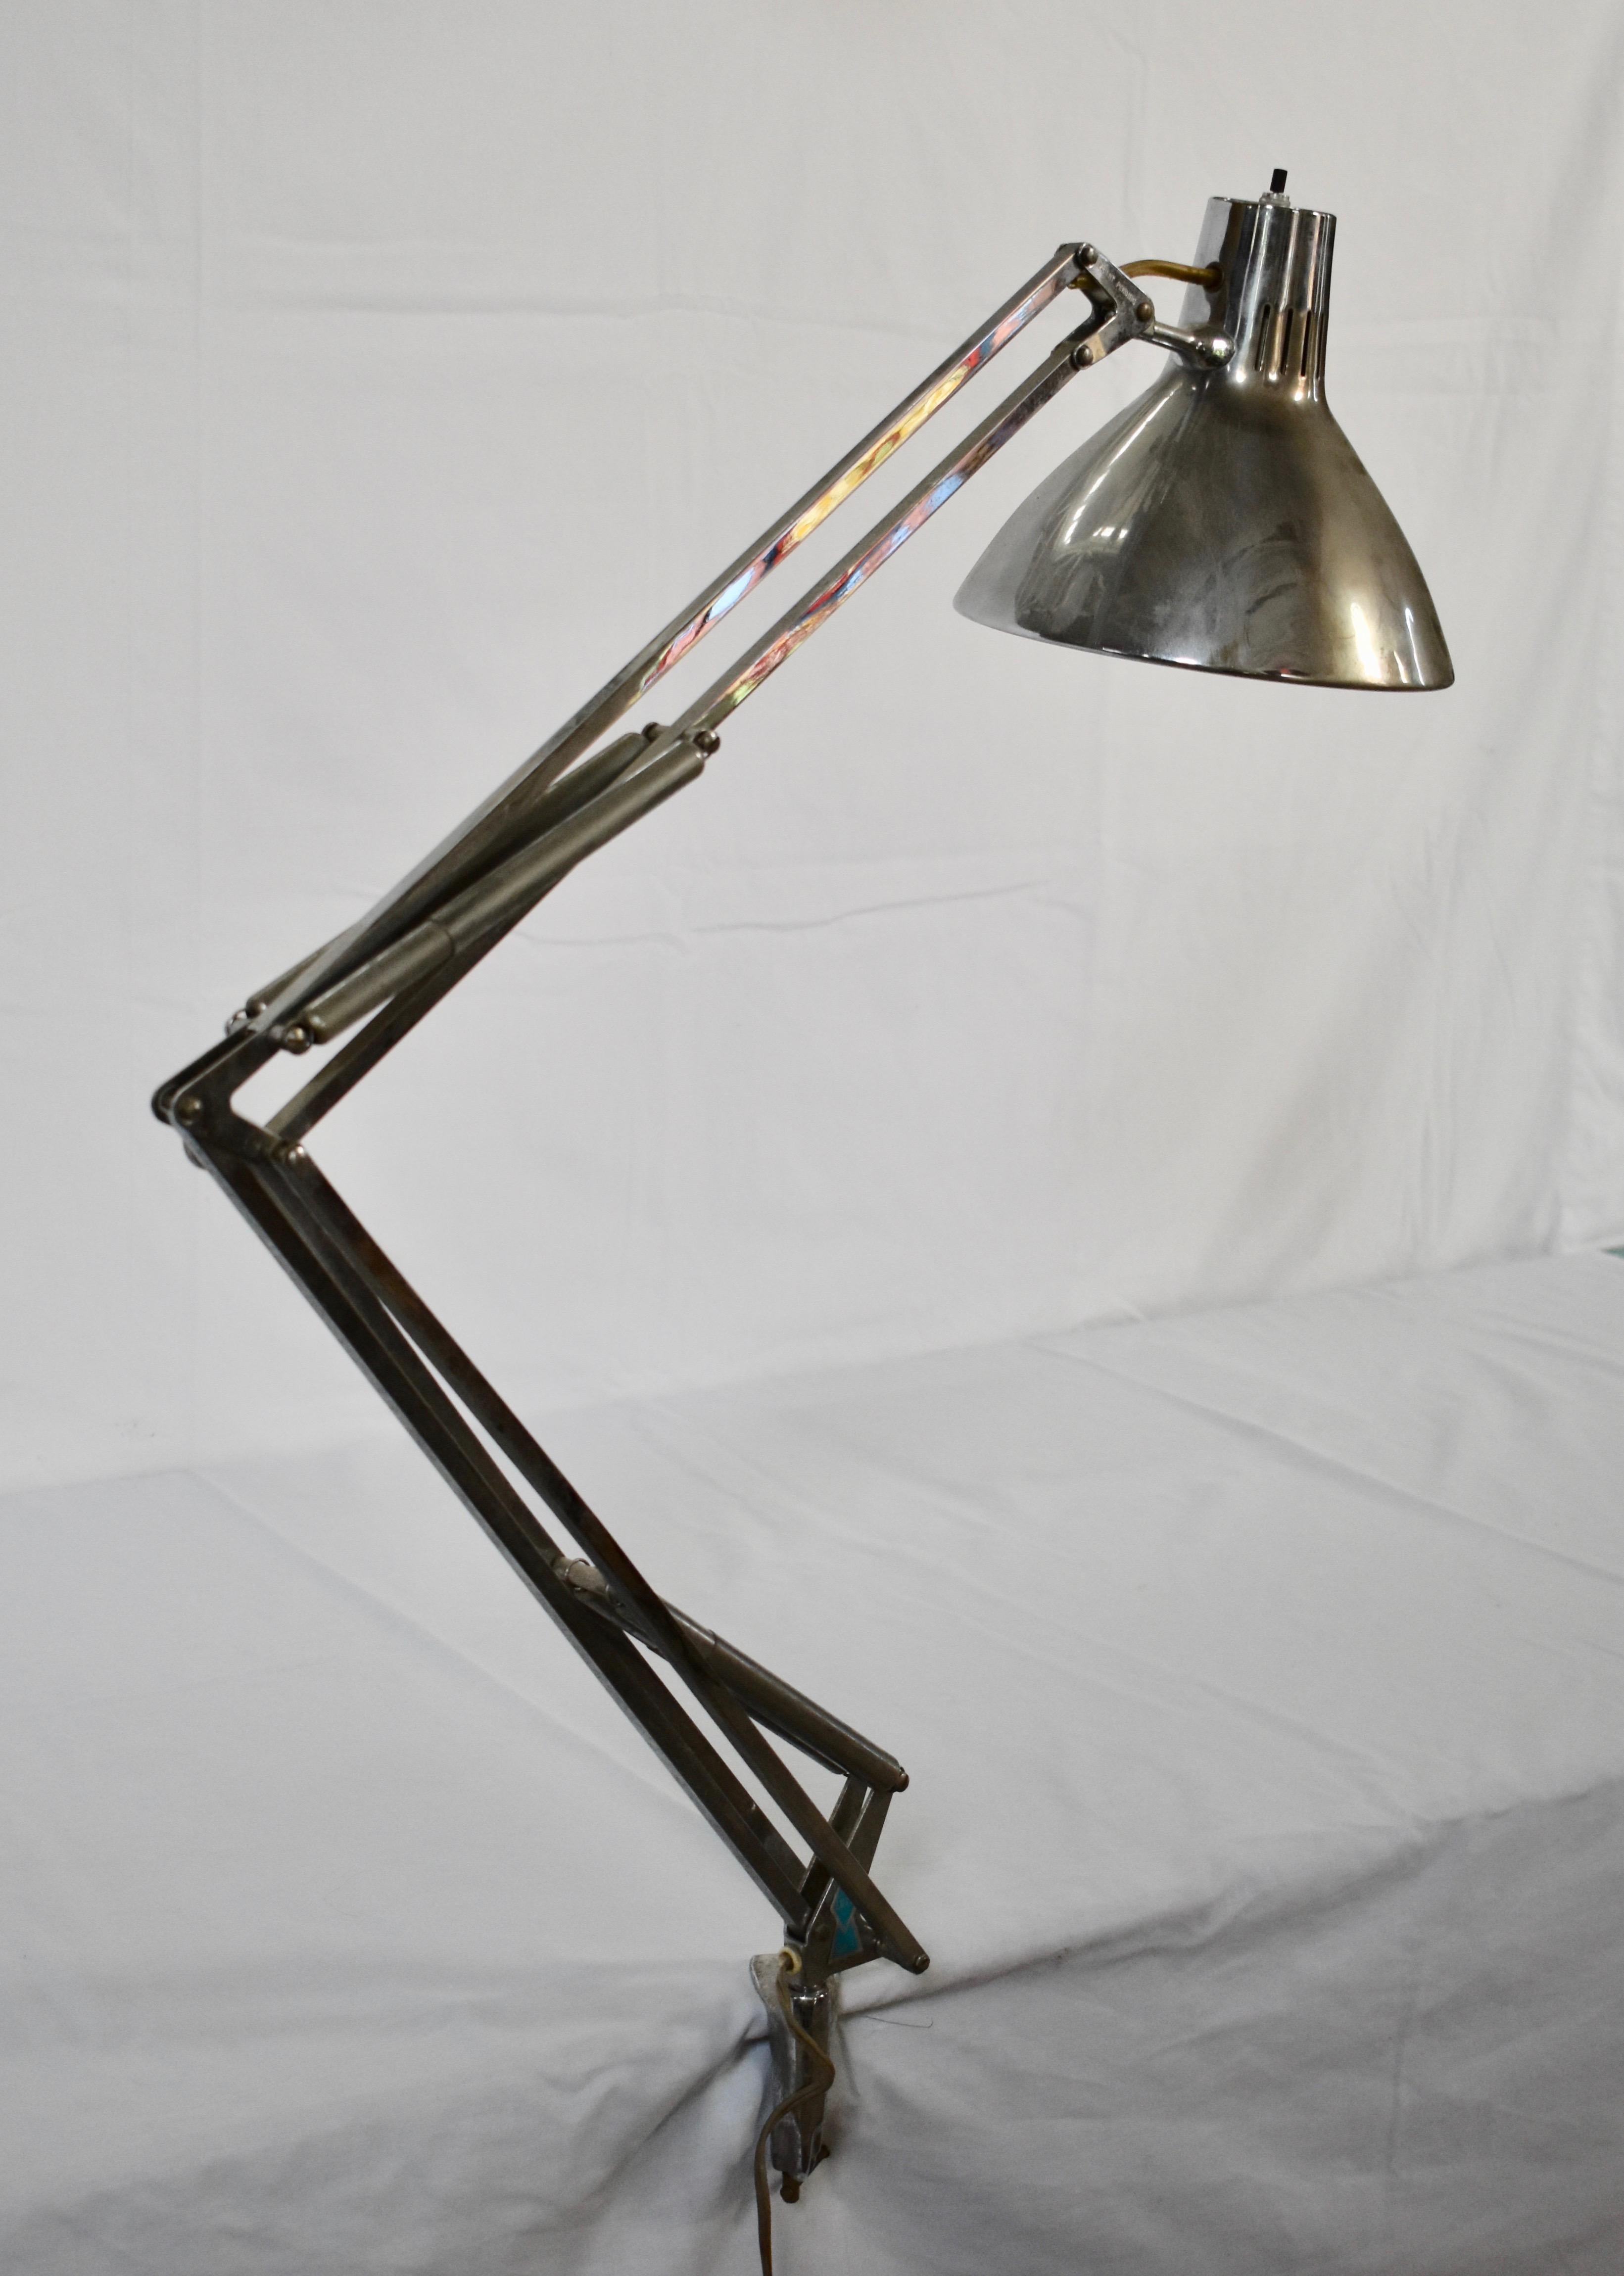 This is a beautiful chrome architect's desk lamp with original clamping hardware, designed by Jacob Jacobsen circa 1960. The fixture retains excellent bright surfaces and perfect adjustment function.